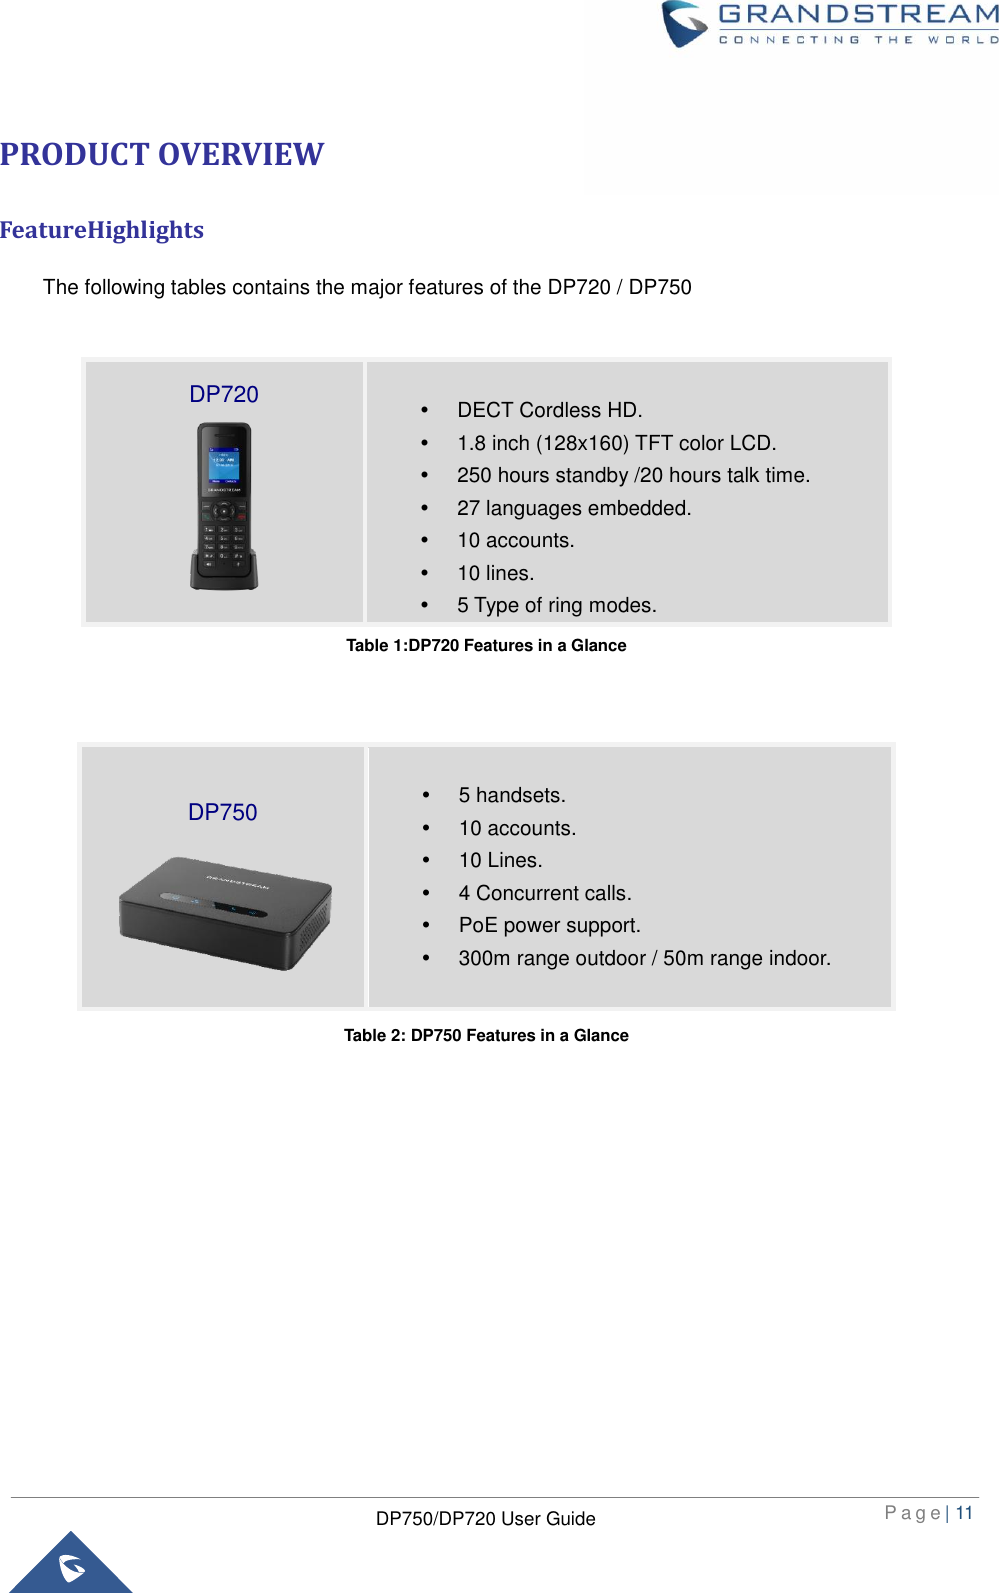  P a g e | 11  DP750/DP720 User Guide  PRODUCT OVERVIEW FeatureHighlights  The following tables contains the major features of the DP720 / DP750                            Table 1:DP720 Features in a Glance            Table 2: DP750 Features in a Glance          DP720     DECT Cordless HD.   1.8 inch (128x160) TFT color LCD.   250 hours standby /20 hours talk time.   27 languages embedded.   10 accounts.   10 lines.   5 Type of ring modes.  DP750     5 handsets.   10 accounts.  10 Lines.  4 Concurrent calls.   PoE power support.   300m range outdoor / 50m range indoor.  